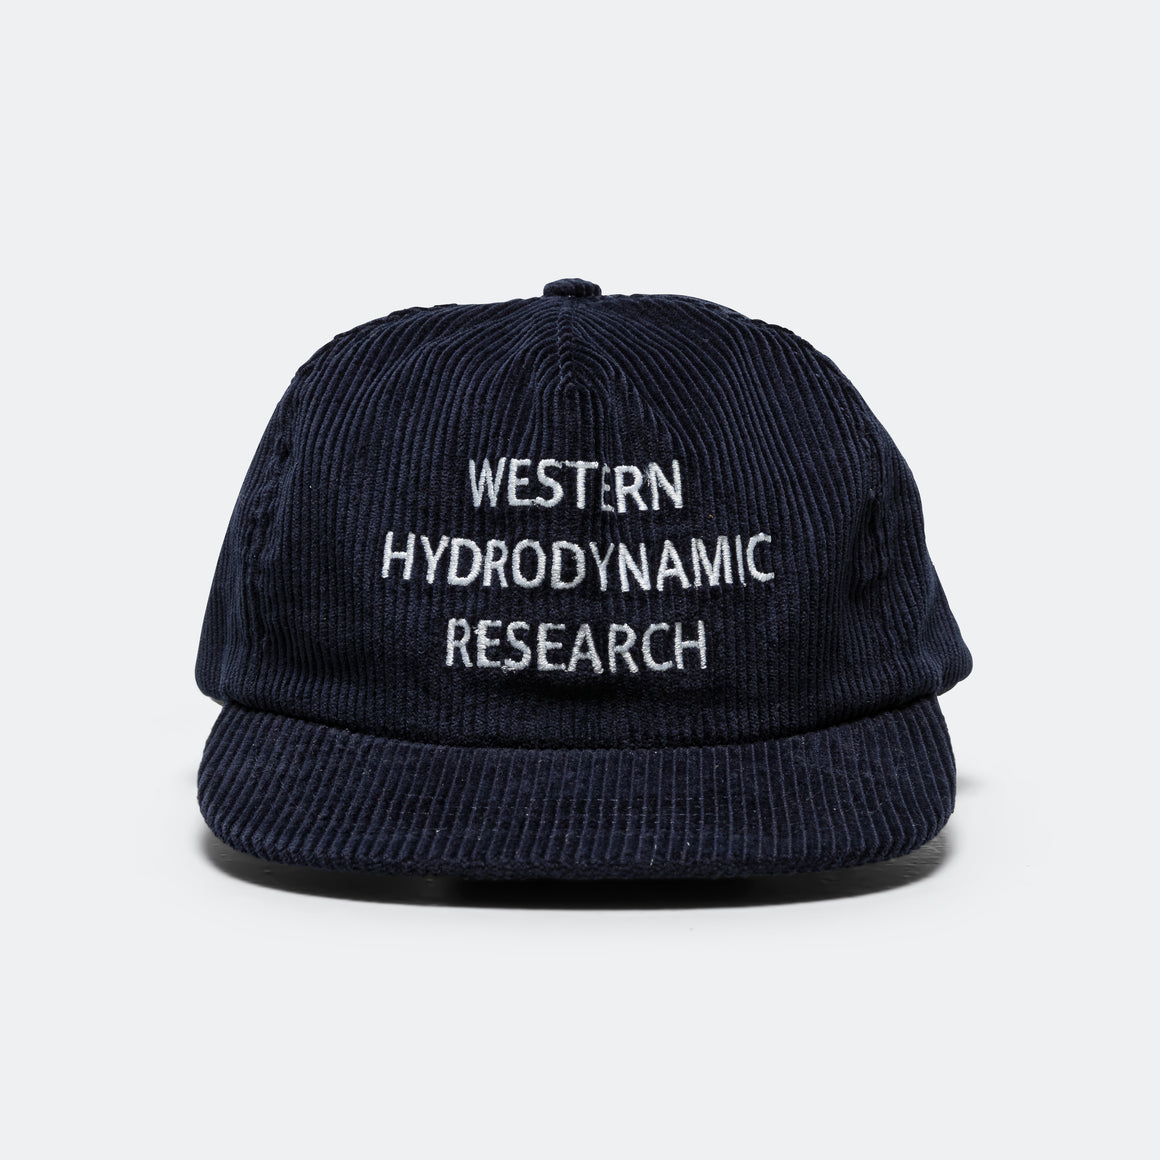 Whale Cord Hat - Navy